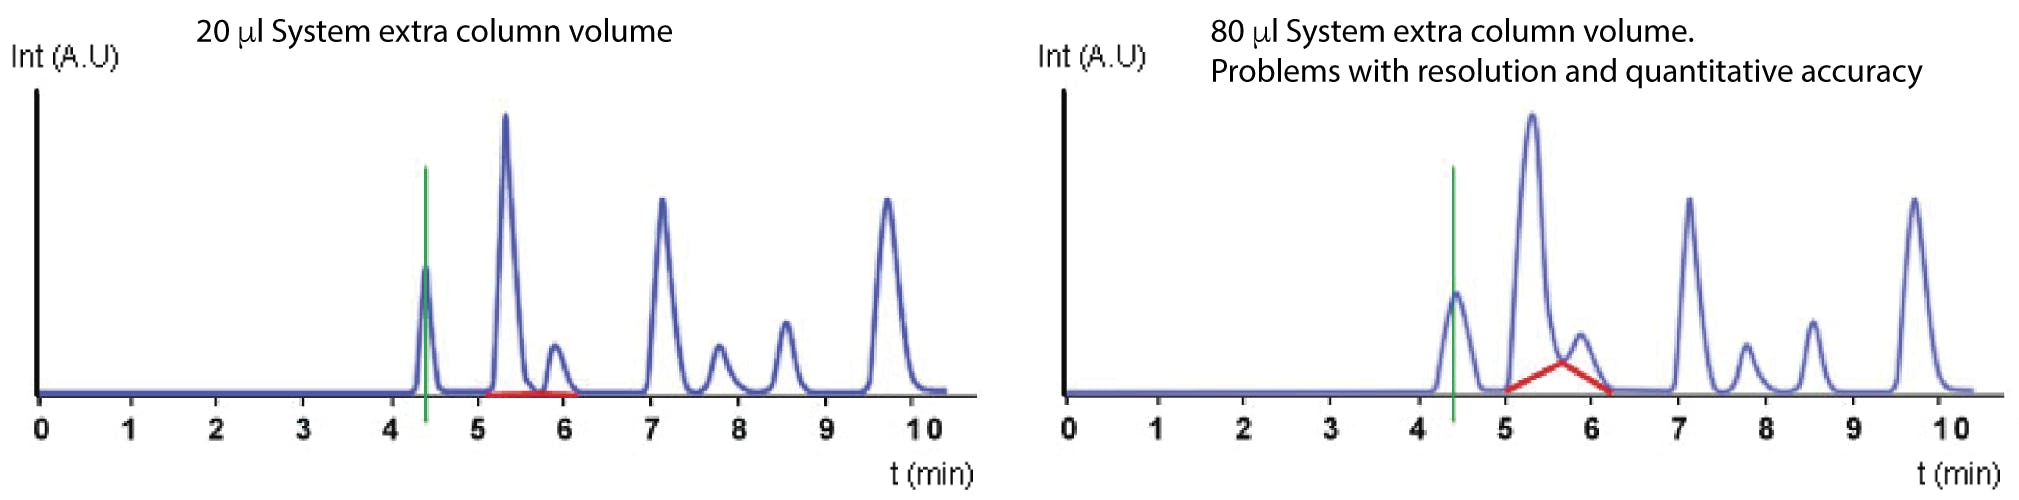 Effect of extra column volume on resolution and quantitation